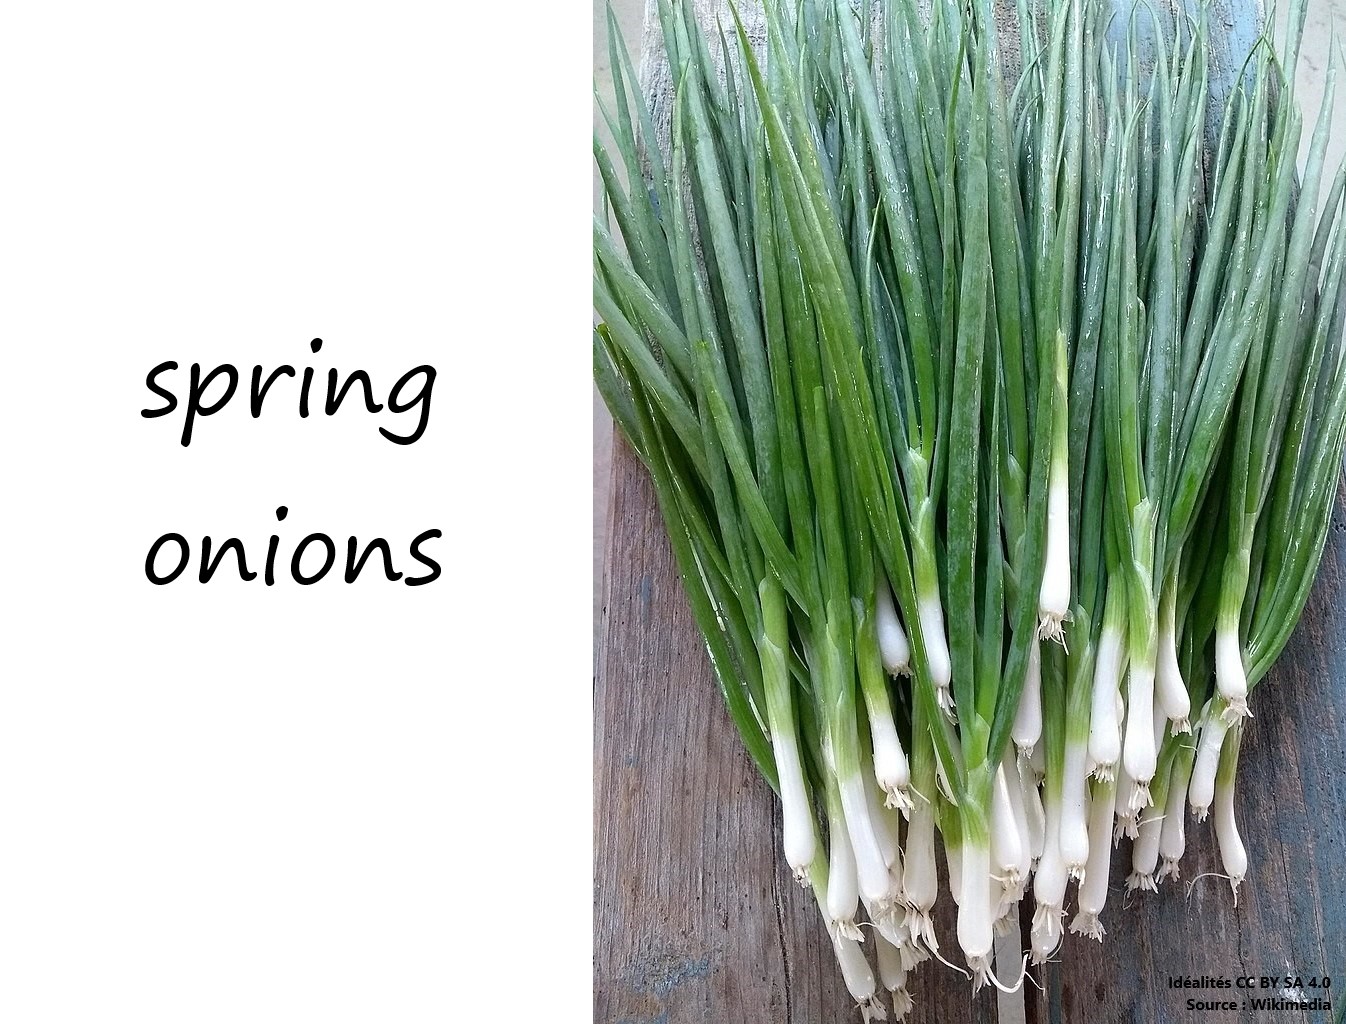 Spring onions photo labelled